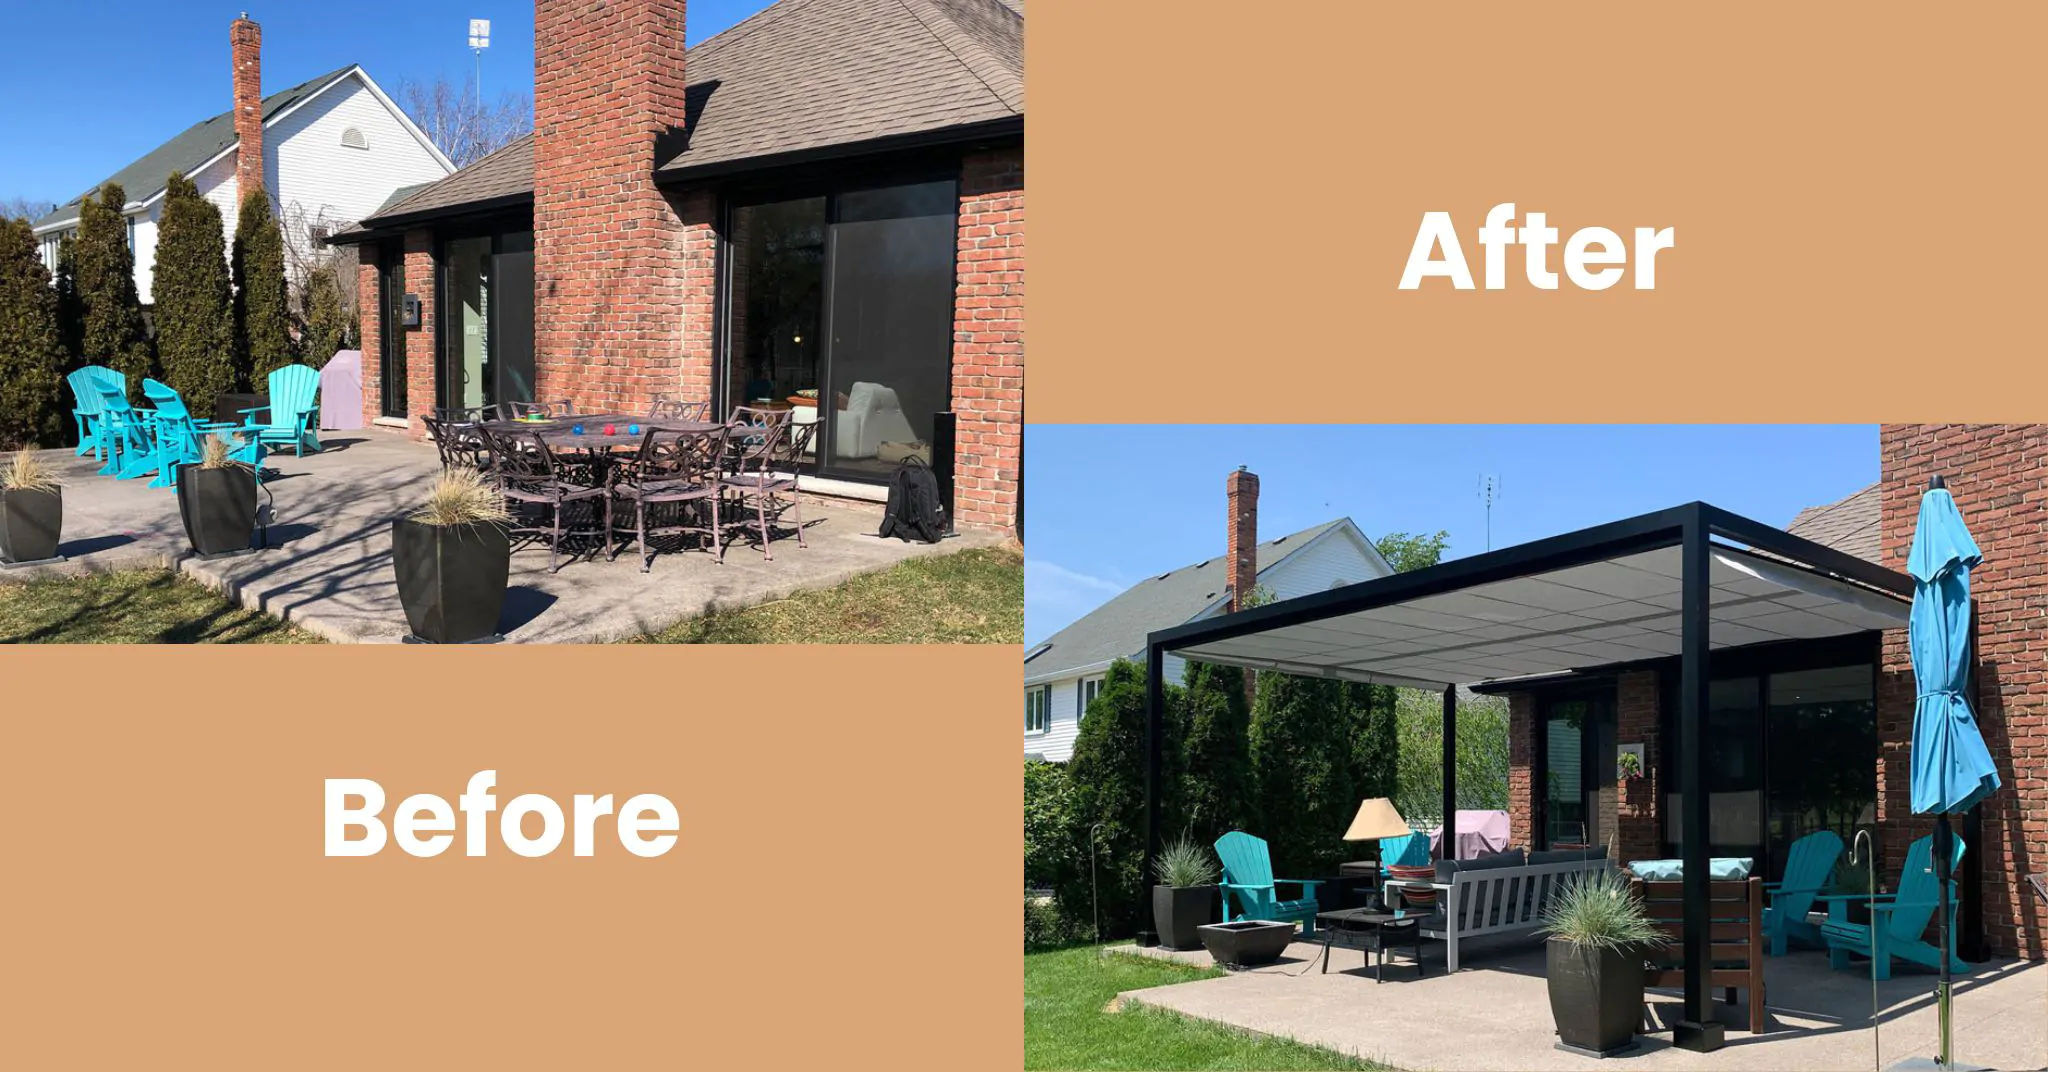 Before and After Shade Structures Installation Service - All Pro Cherry Hill Deck Builders